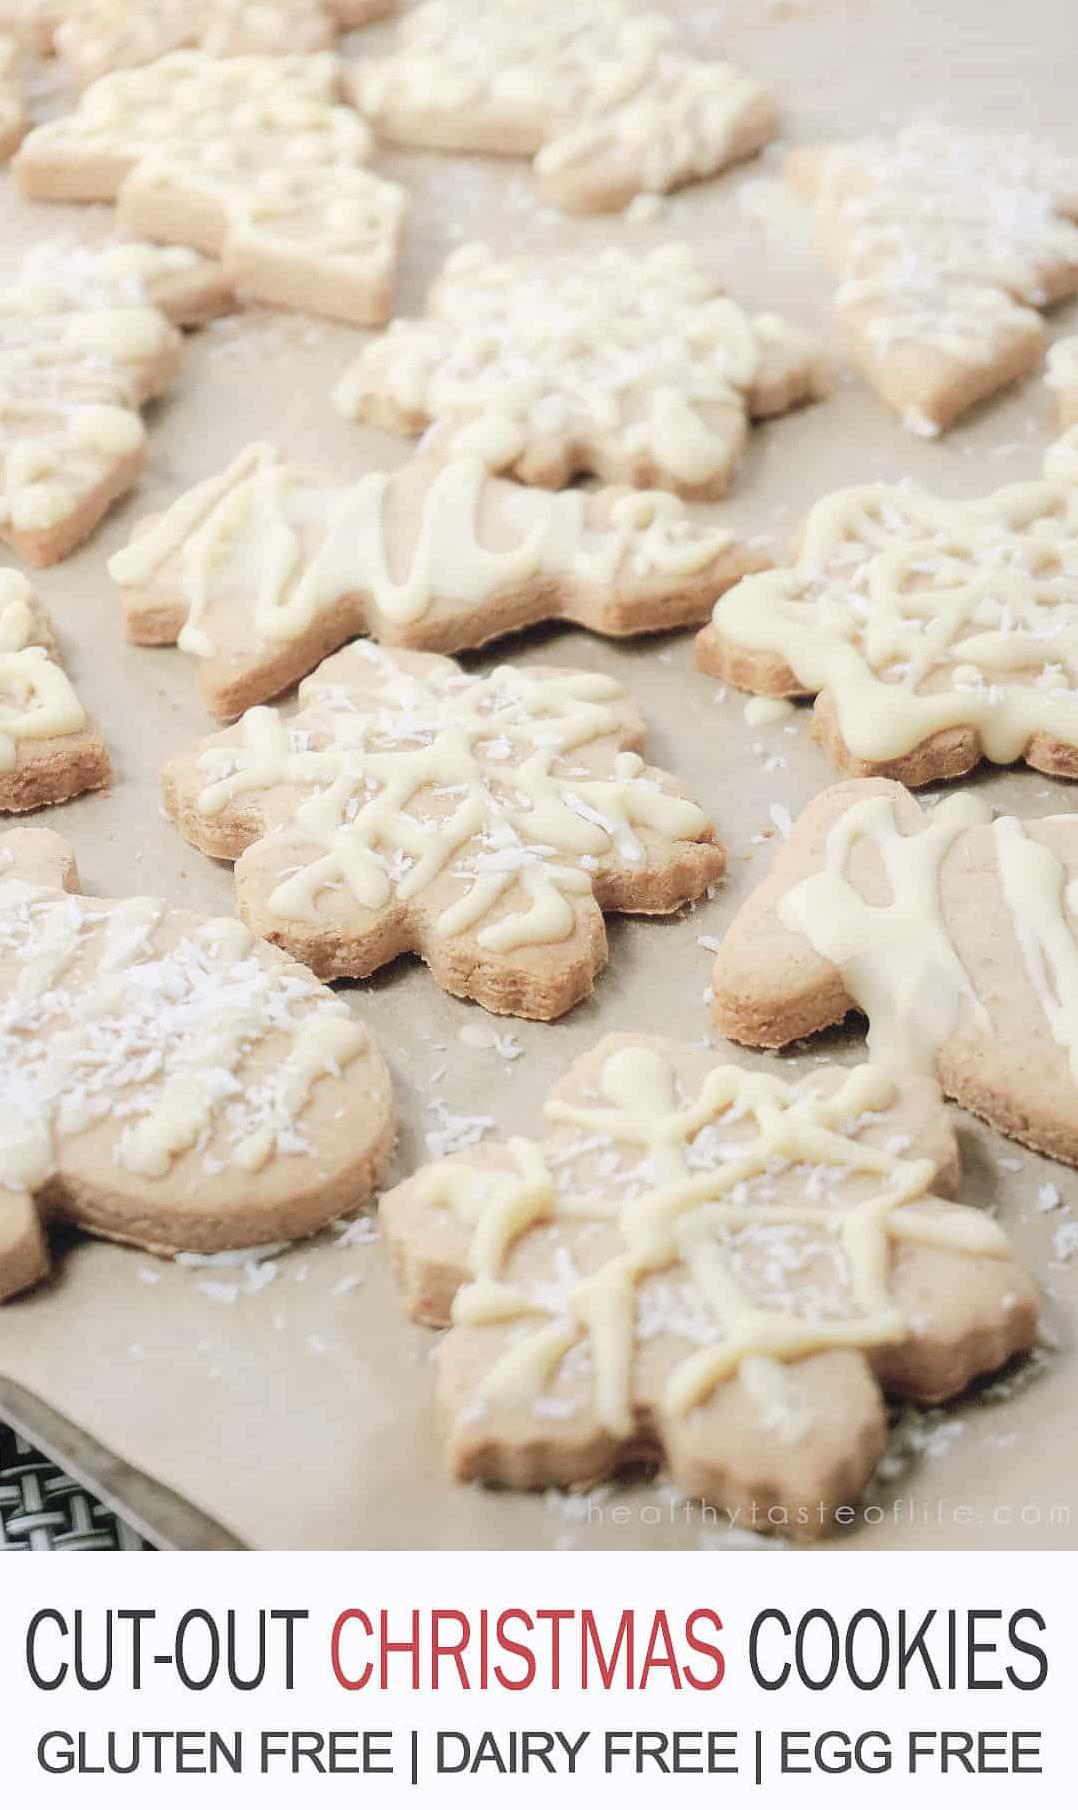  With just a handful of simple ingredients, you can whip up a batch of these cookies in no time.